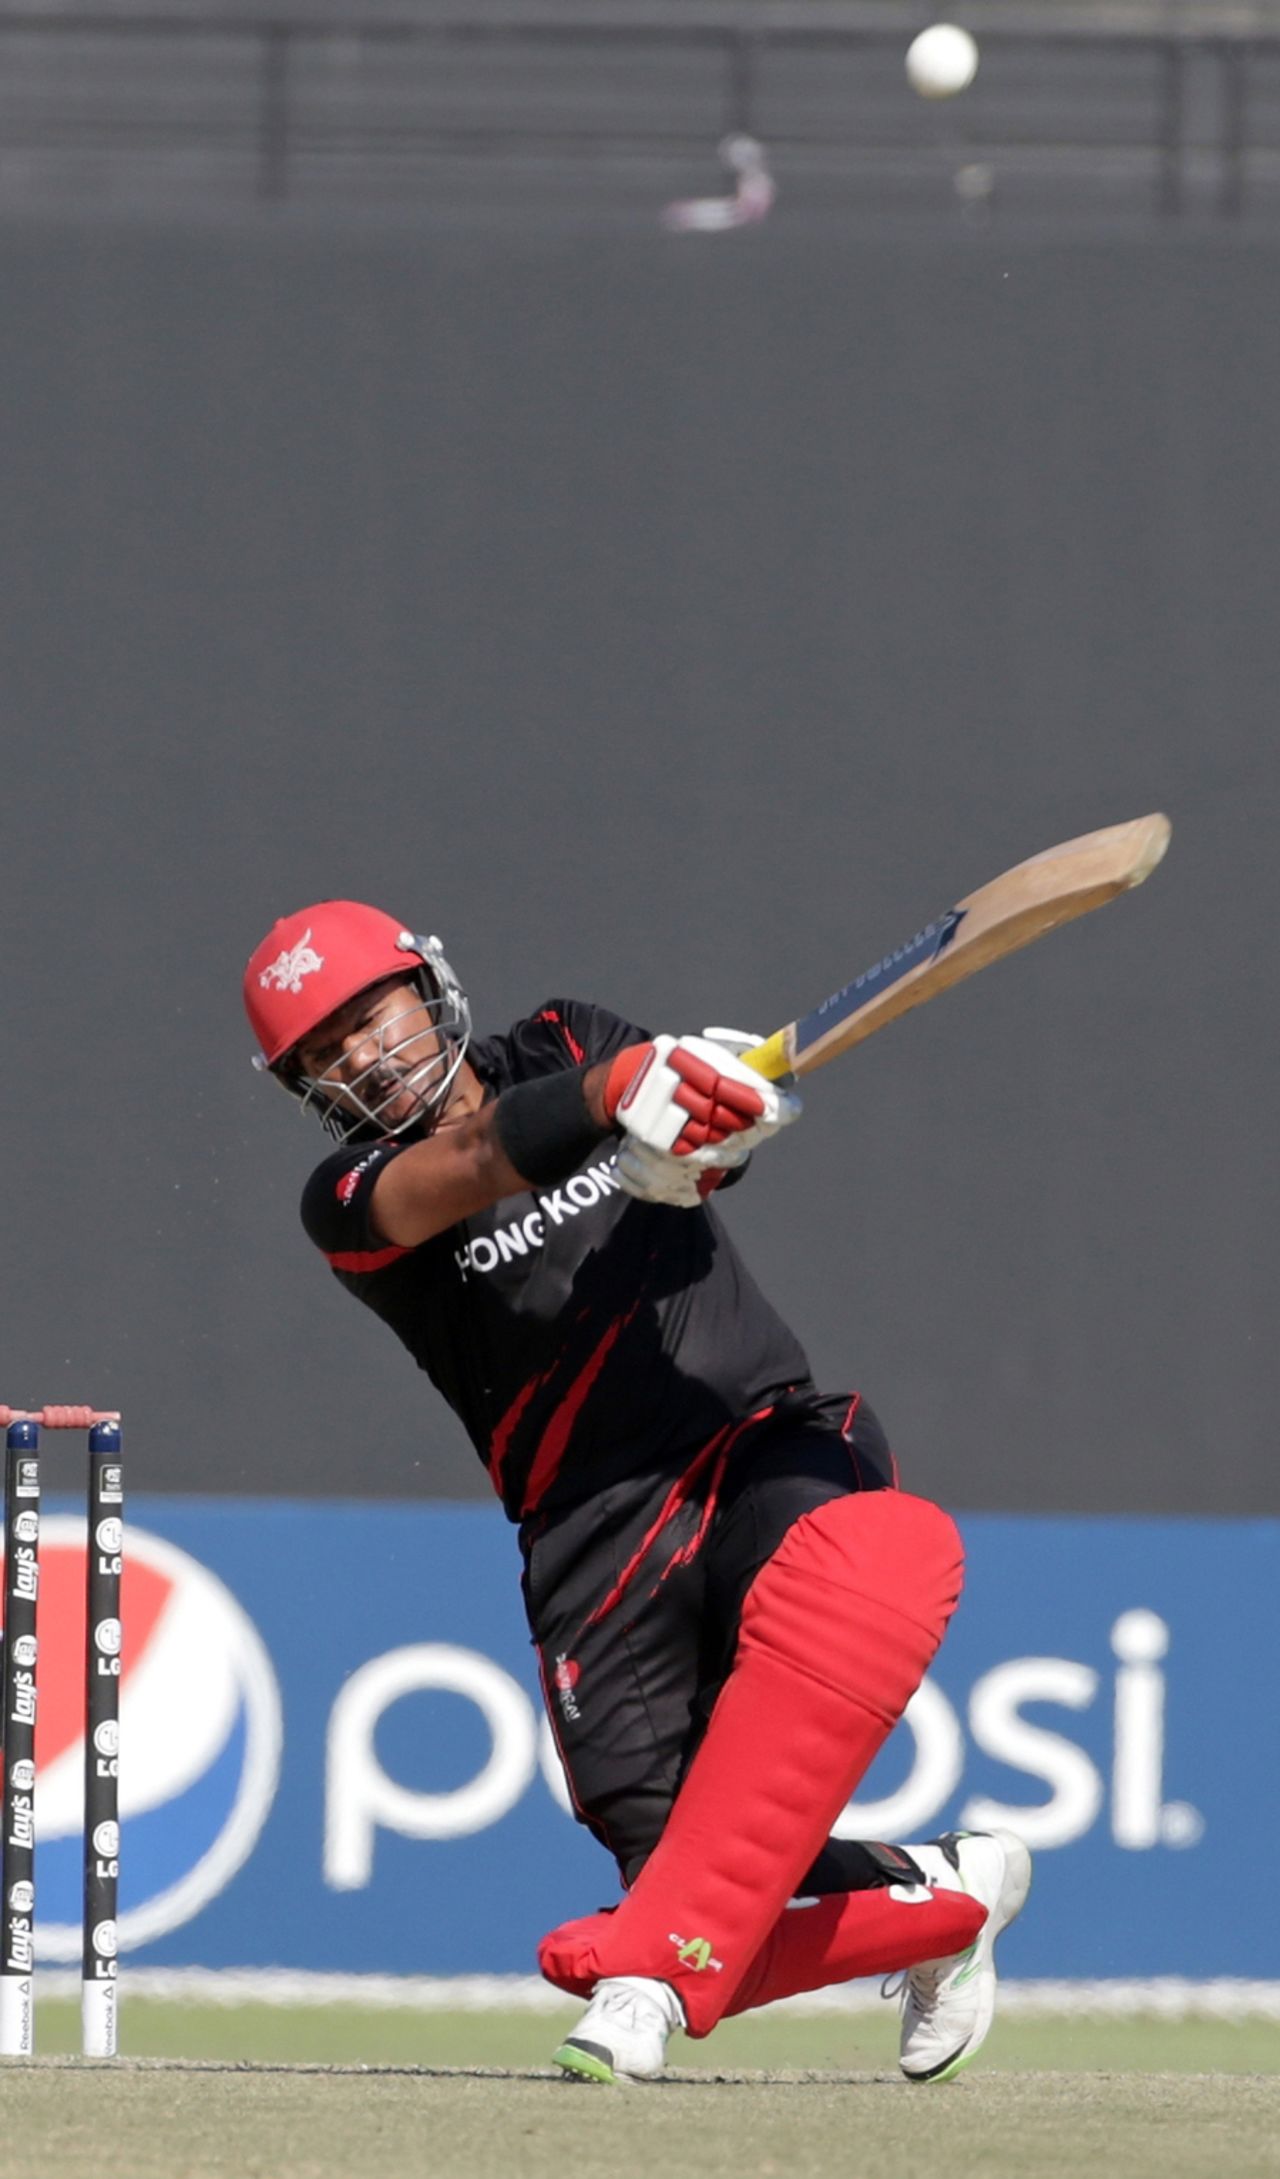 Moner Ahmed of Hong Kong batting during the Hong Kong v Nepal Quarter Final match 60 at the ICC World Twenty20 Qualifiers at the Zayed Cricket Stadium on November 27, 2013 in Abu Dhabi, United Arab Emirates. (Photo by Graham Crouch-IDI/IDI via Getty Images)